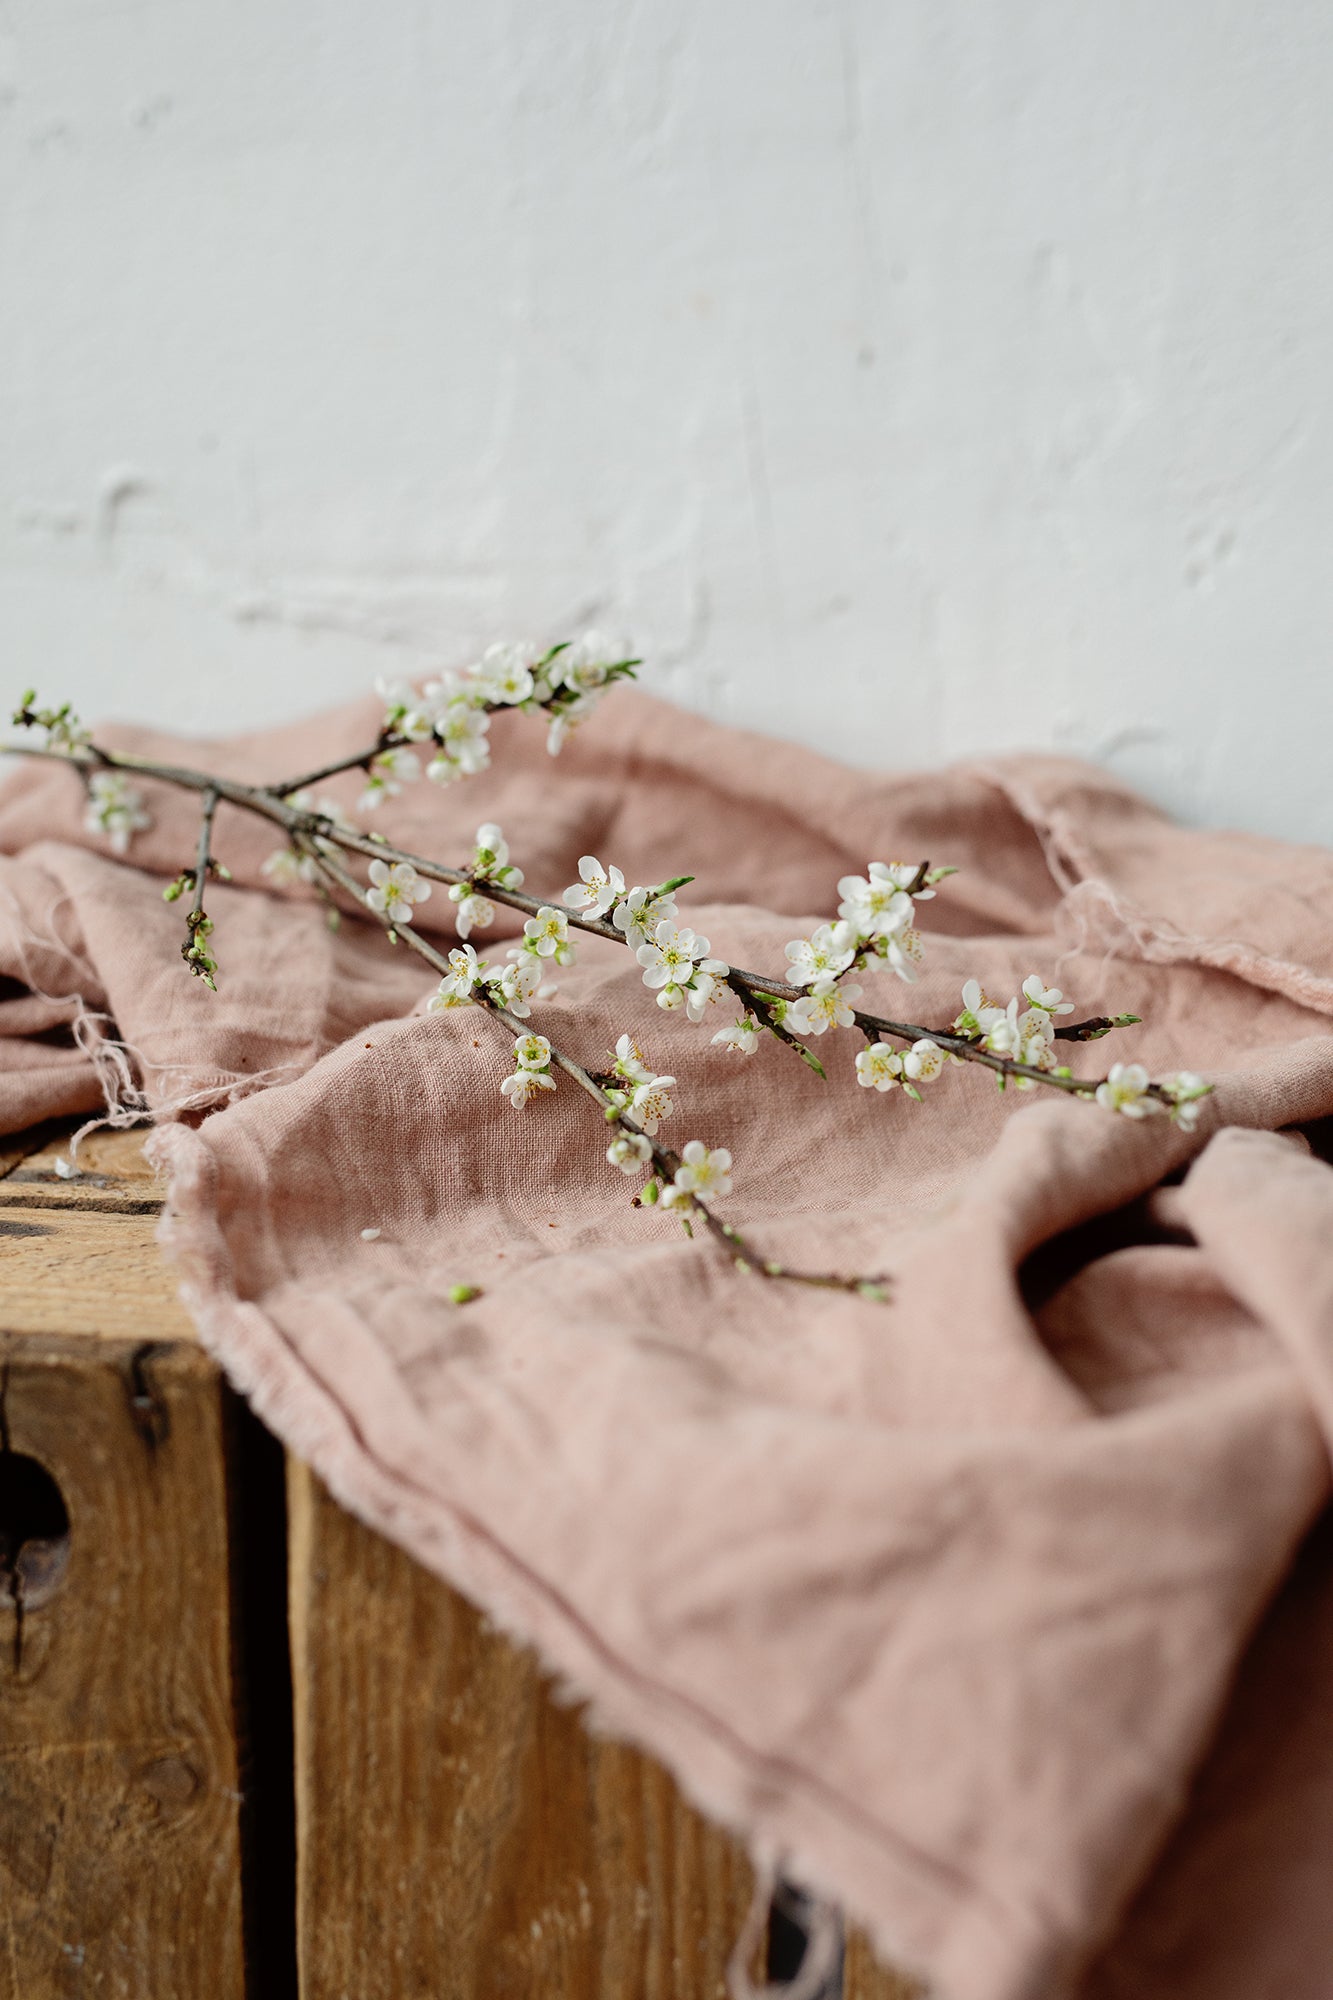 More About Linen: Benefits & Beauty